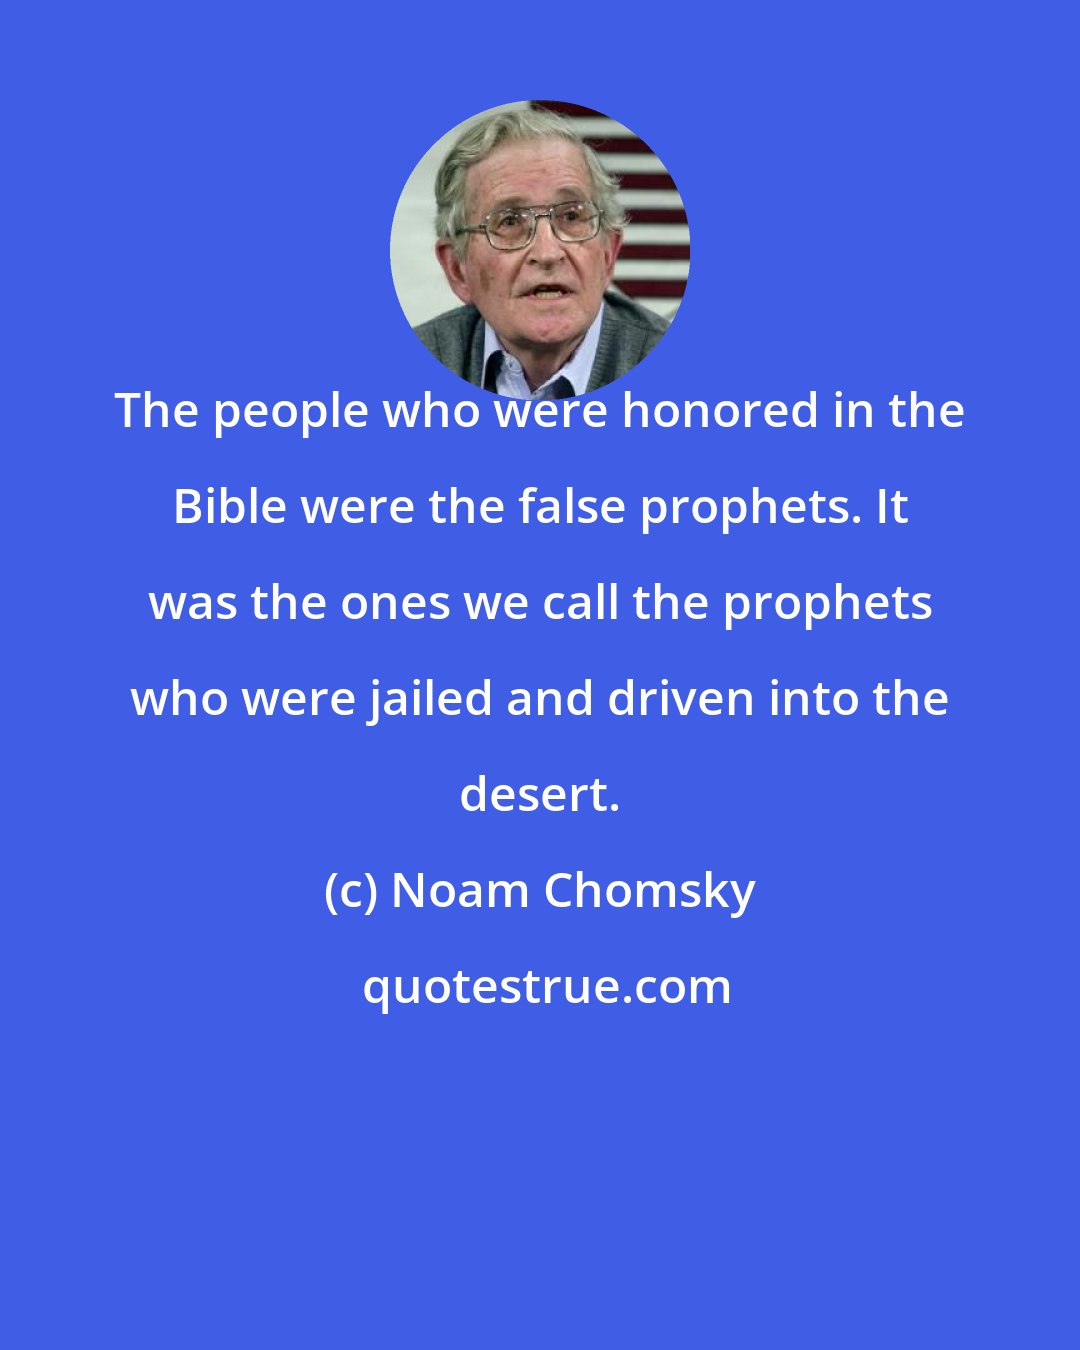 Noam Chomsky: The people who were honored in the Bible were the false prophets. It was the ones we call the prophets who were jailed and driven into the desert.